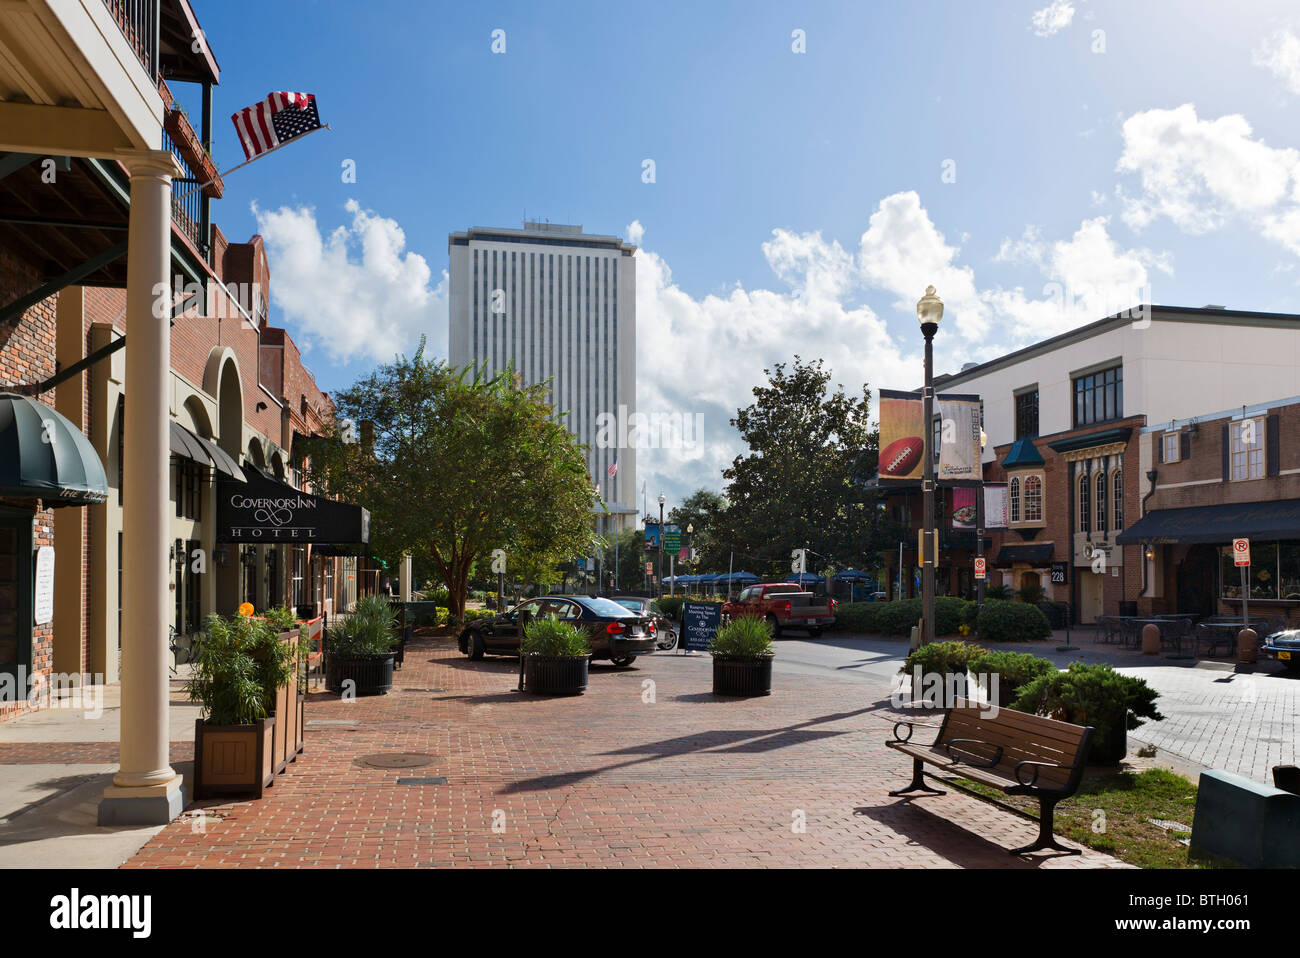 Adams Street with the Governor's Inn Hotel to the left and the new State Capitol Building behind, Tallahassee, Florida, USA Stock Photo